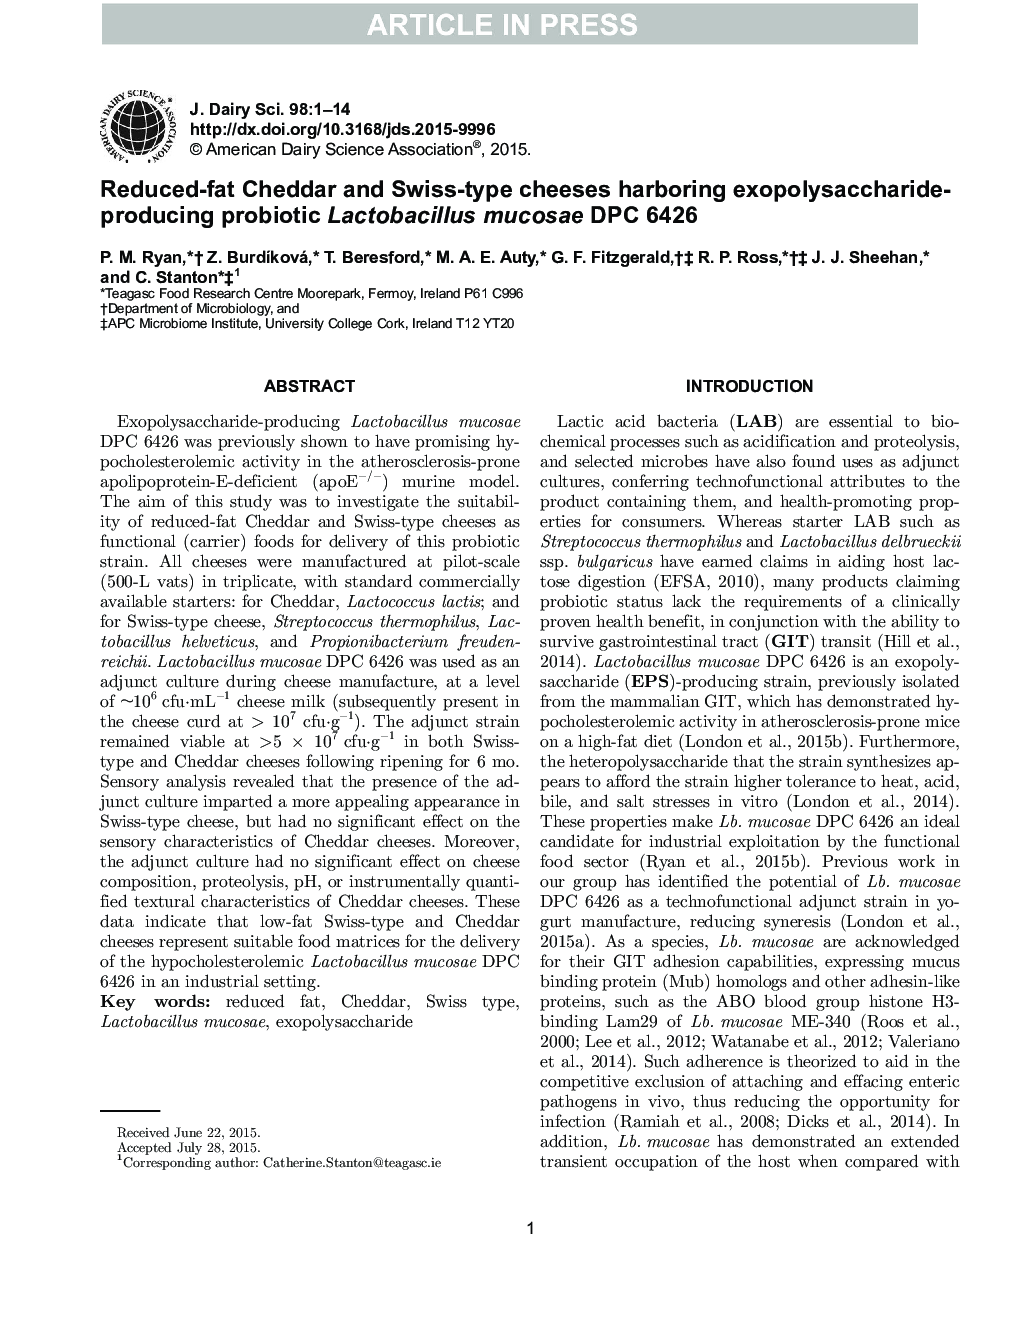 Reduced-fat Cheddar and Swiss-type cheeses harboring exopolysaccharide-producing probiotic Lactobacillus mucosae DPC 6426